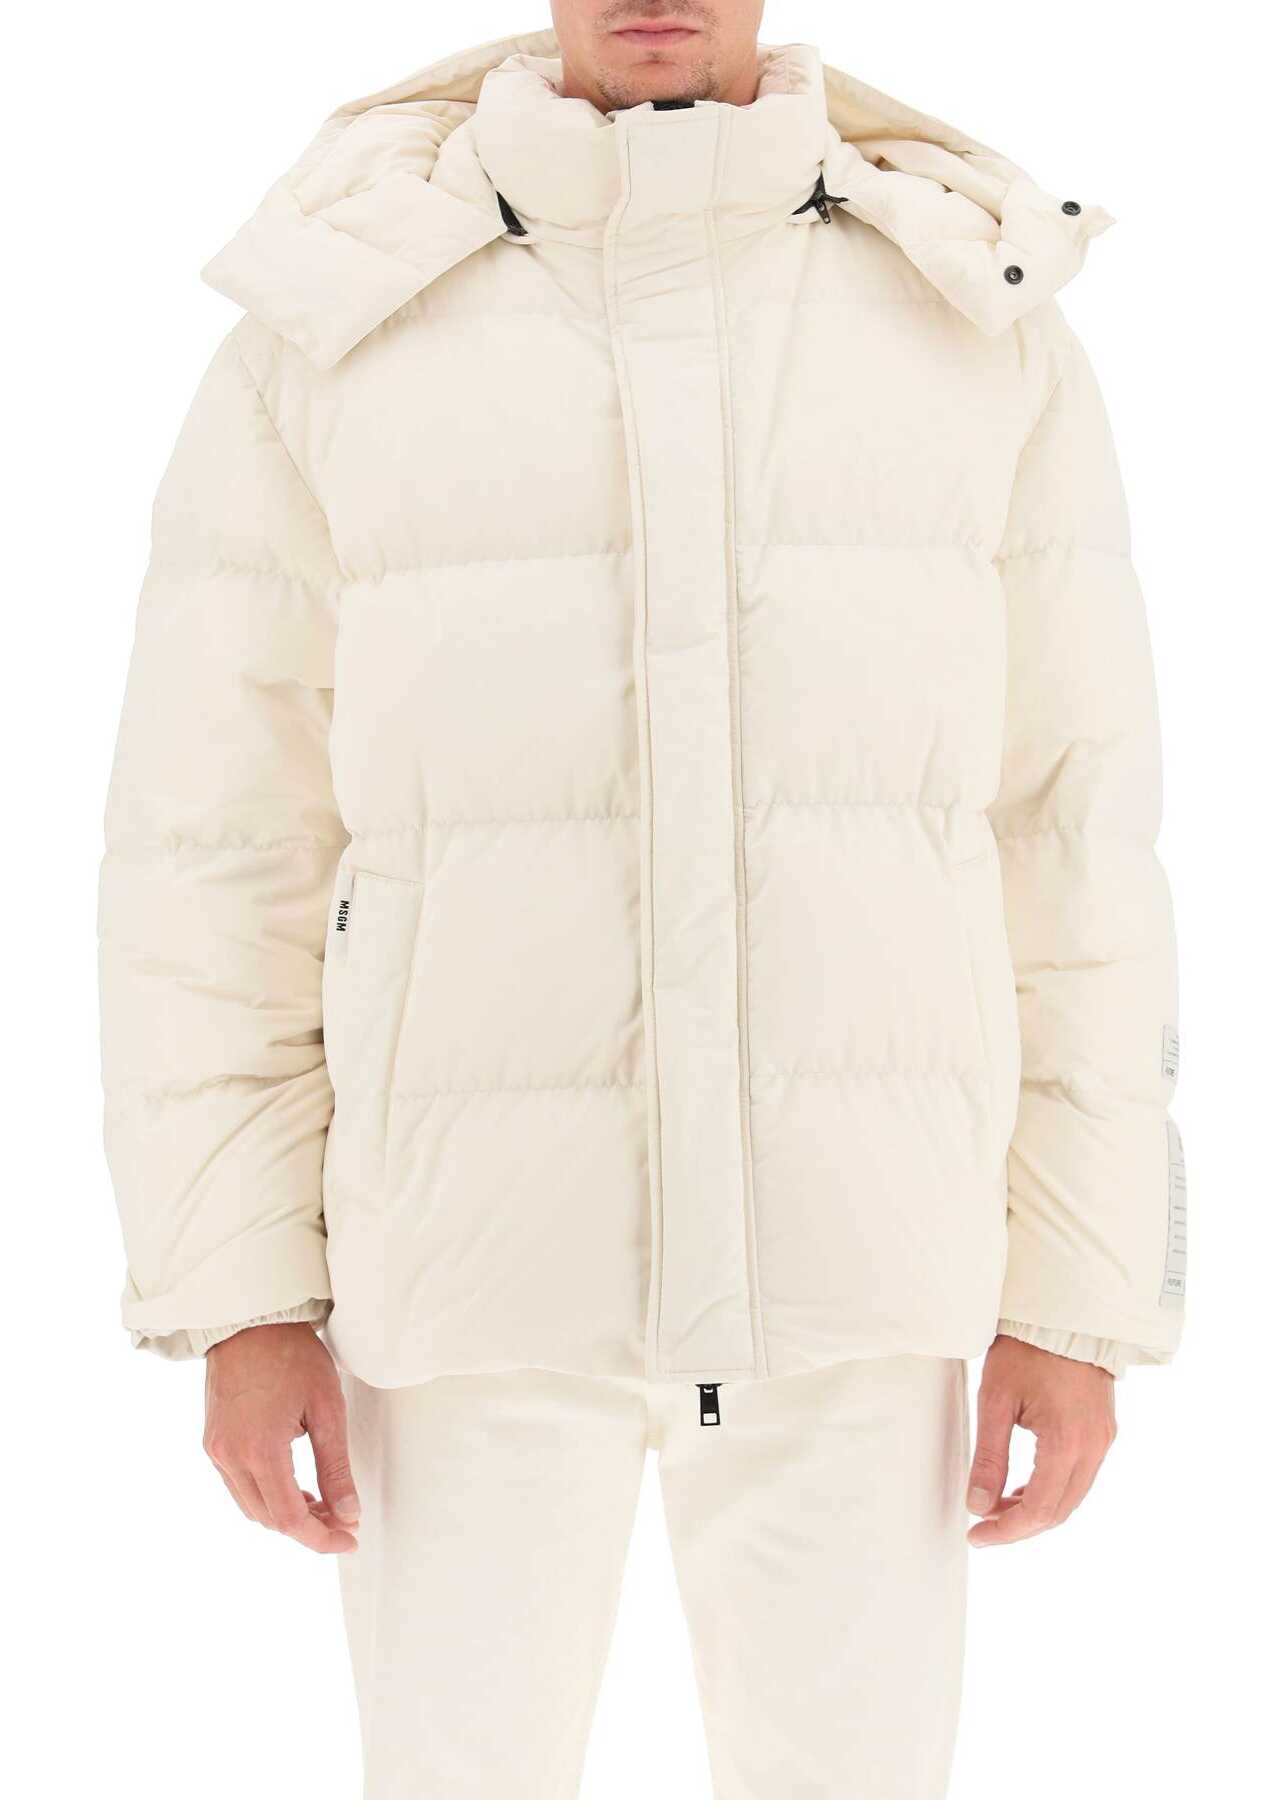 MSGM Fantastic Green Oversized Down Jacket 3140MH191X 217704 OFF WHITE